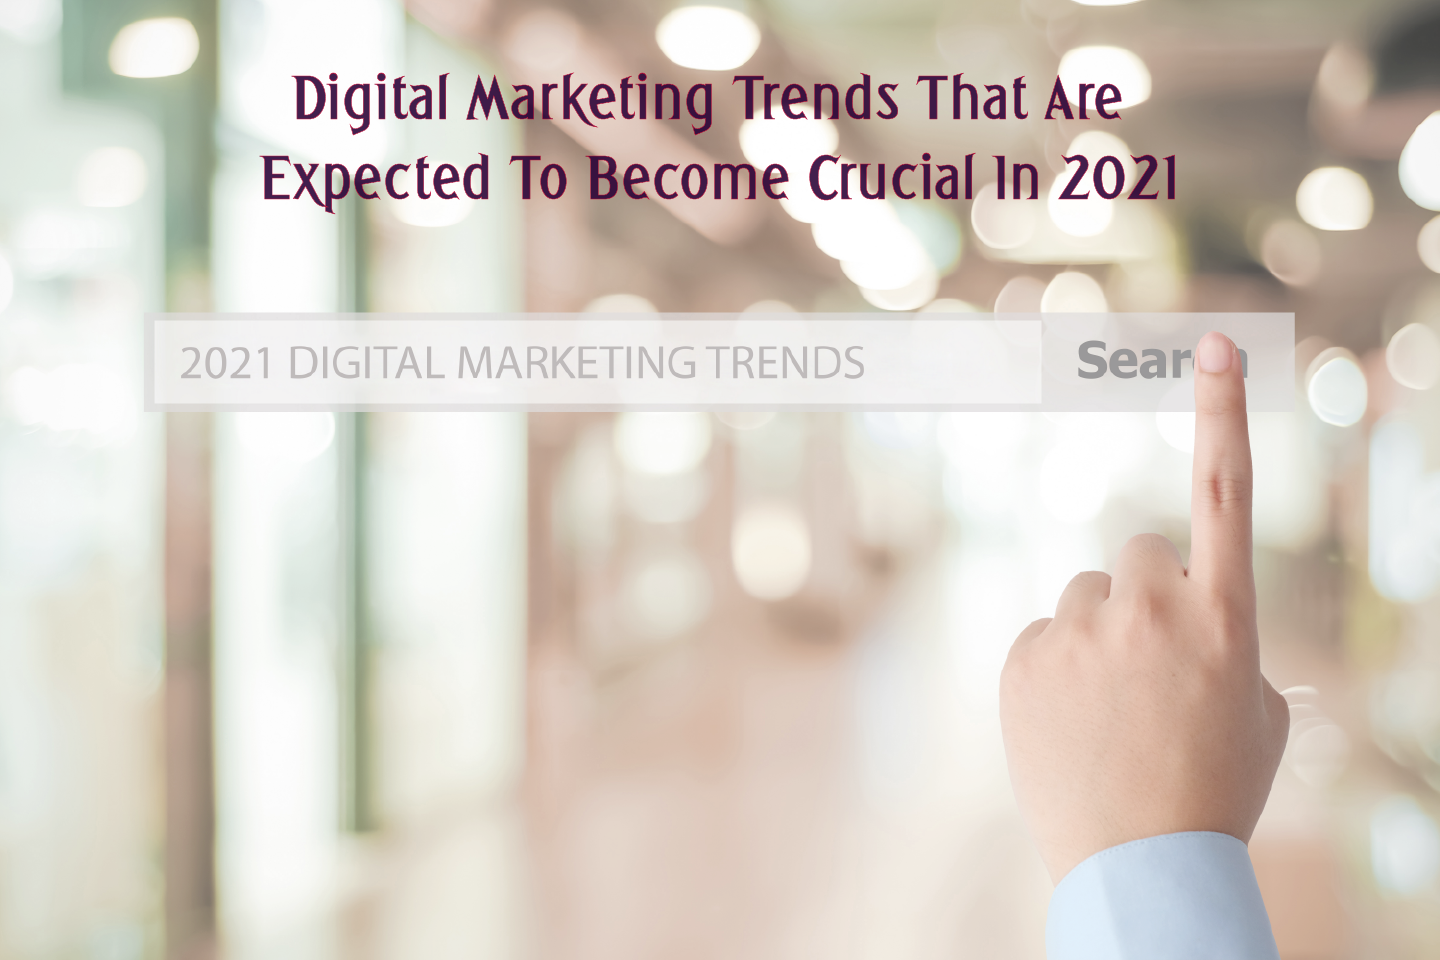 Digital Marketing Trends That Are Expected To Become Crucial In 2021 featured image